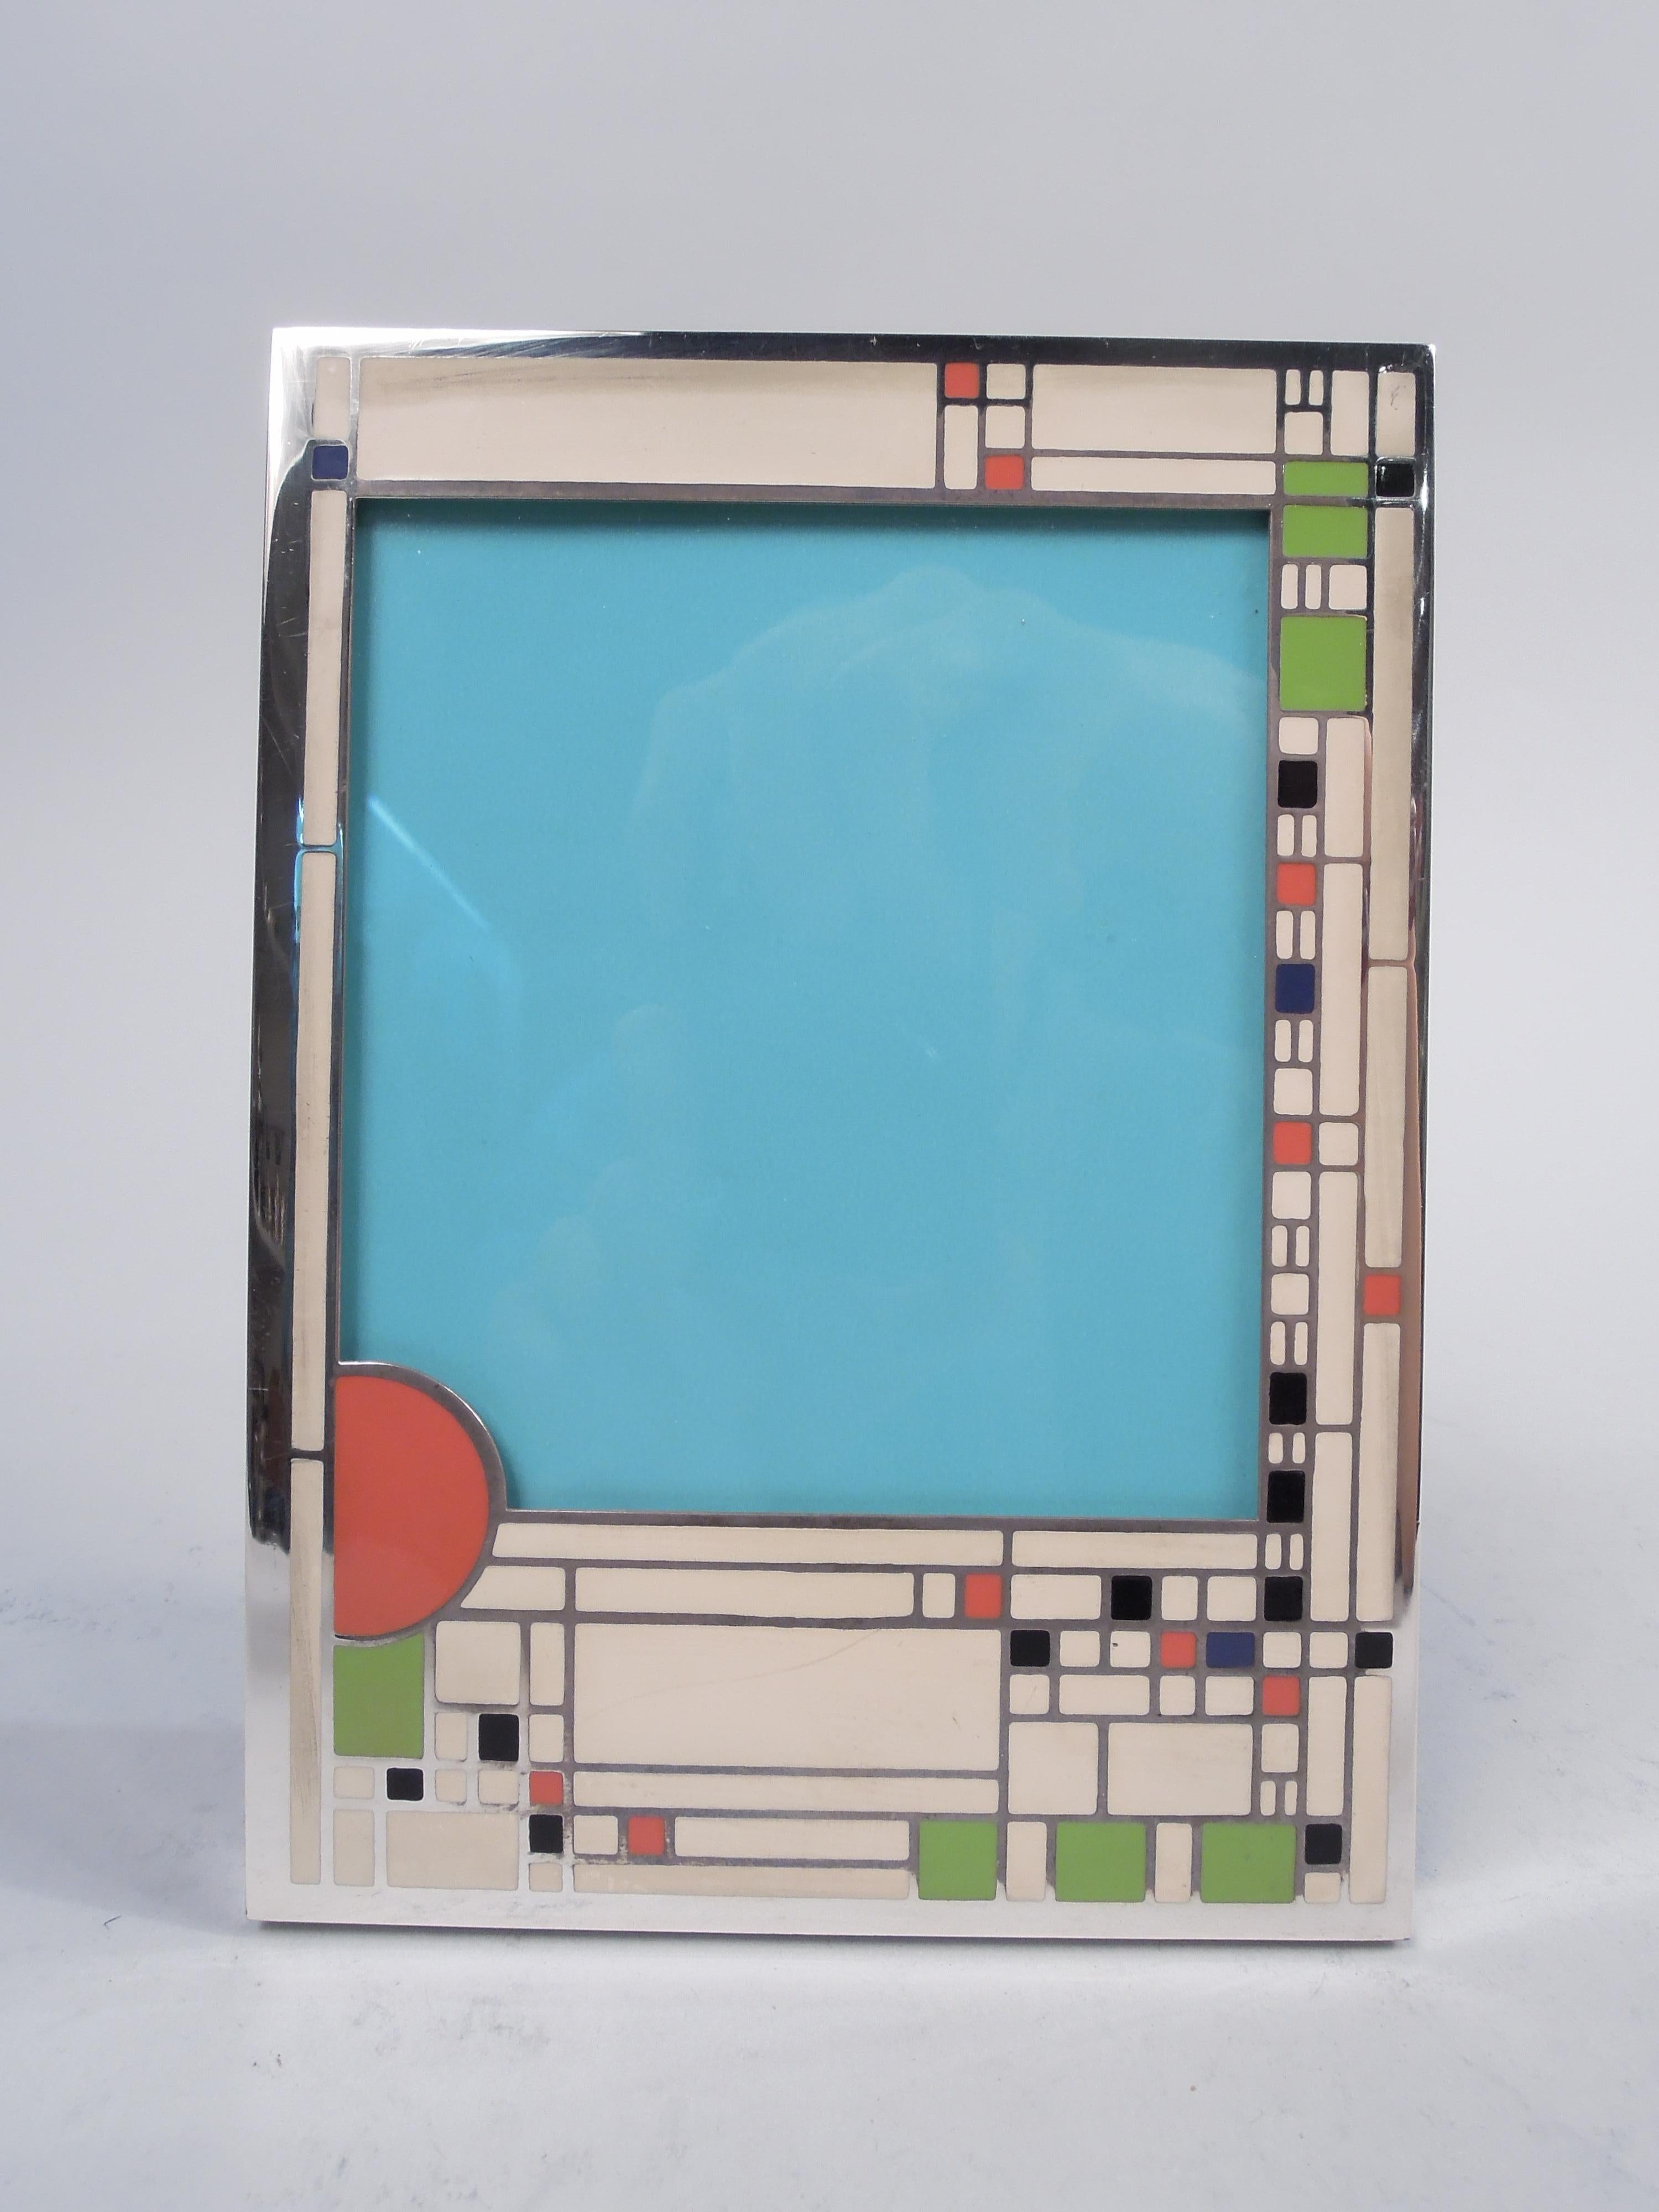 Frank Lloyd Wright-inspired sterling silver and enamel picture frame, ca 1980. Retailed by Tiffany & Co. in New York. Rectangular surround based on stained-glass window design with mostly white as well as some colored blocks in irregular rectilinear